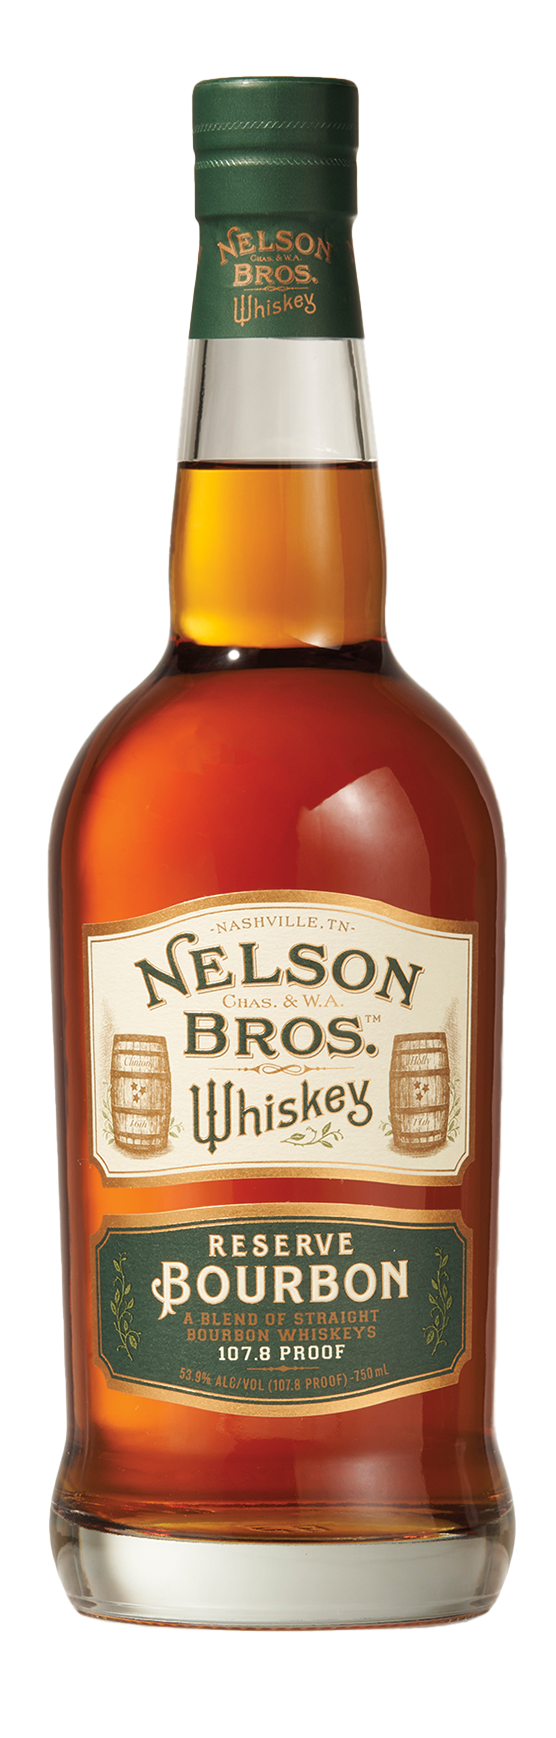 Top10 Wa0422 Nelson The 10 Best Whiskeys Of 2022, According To 'Whisky Advocate'